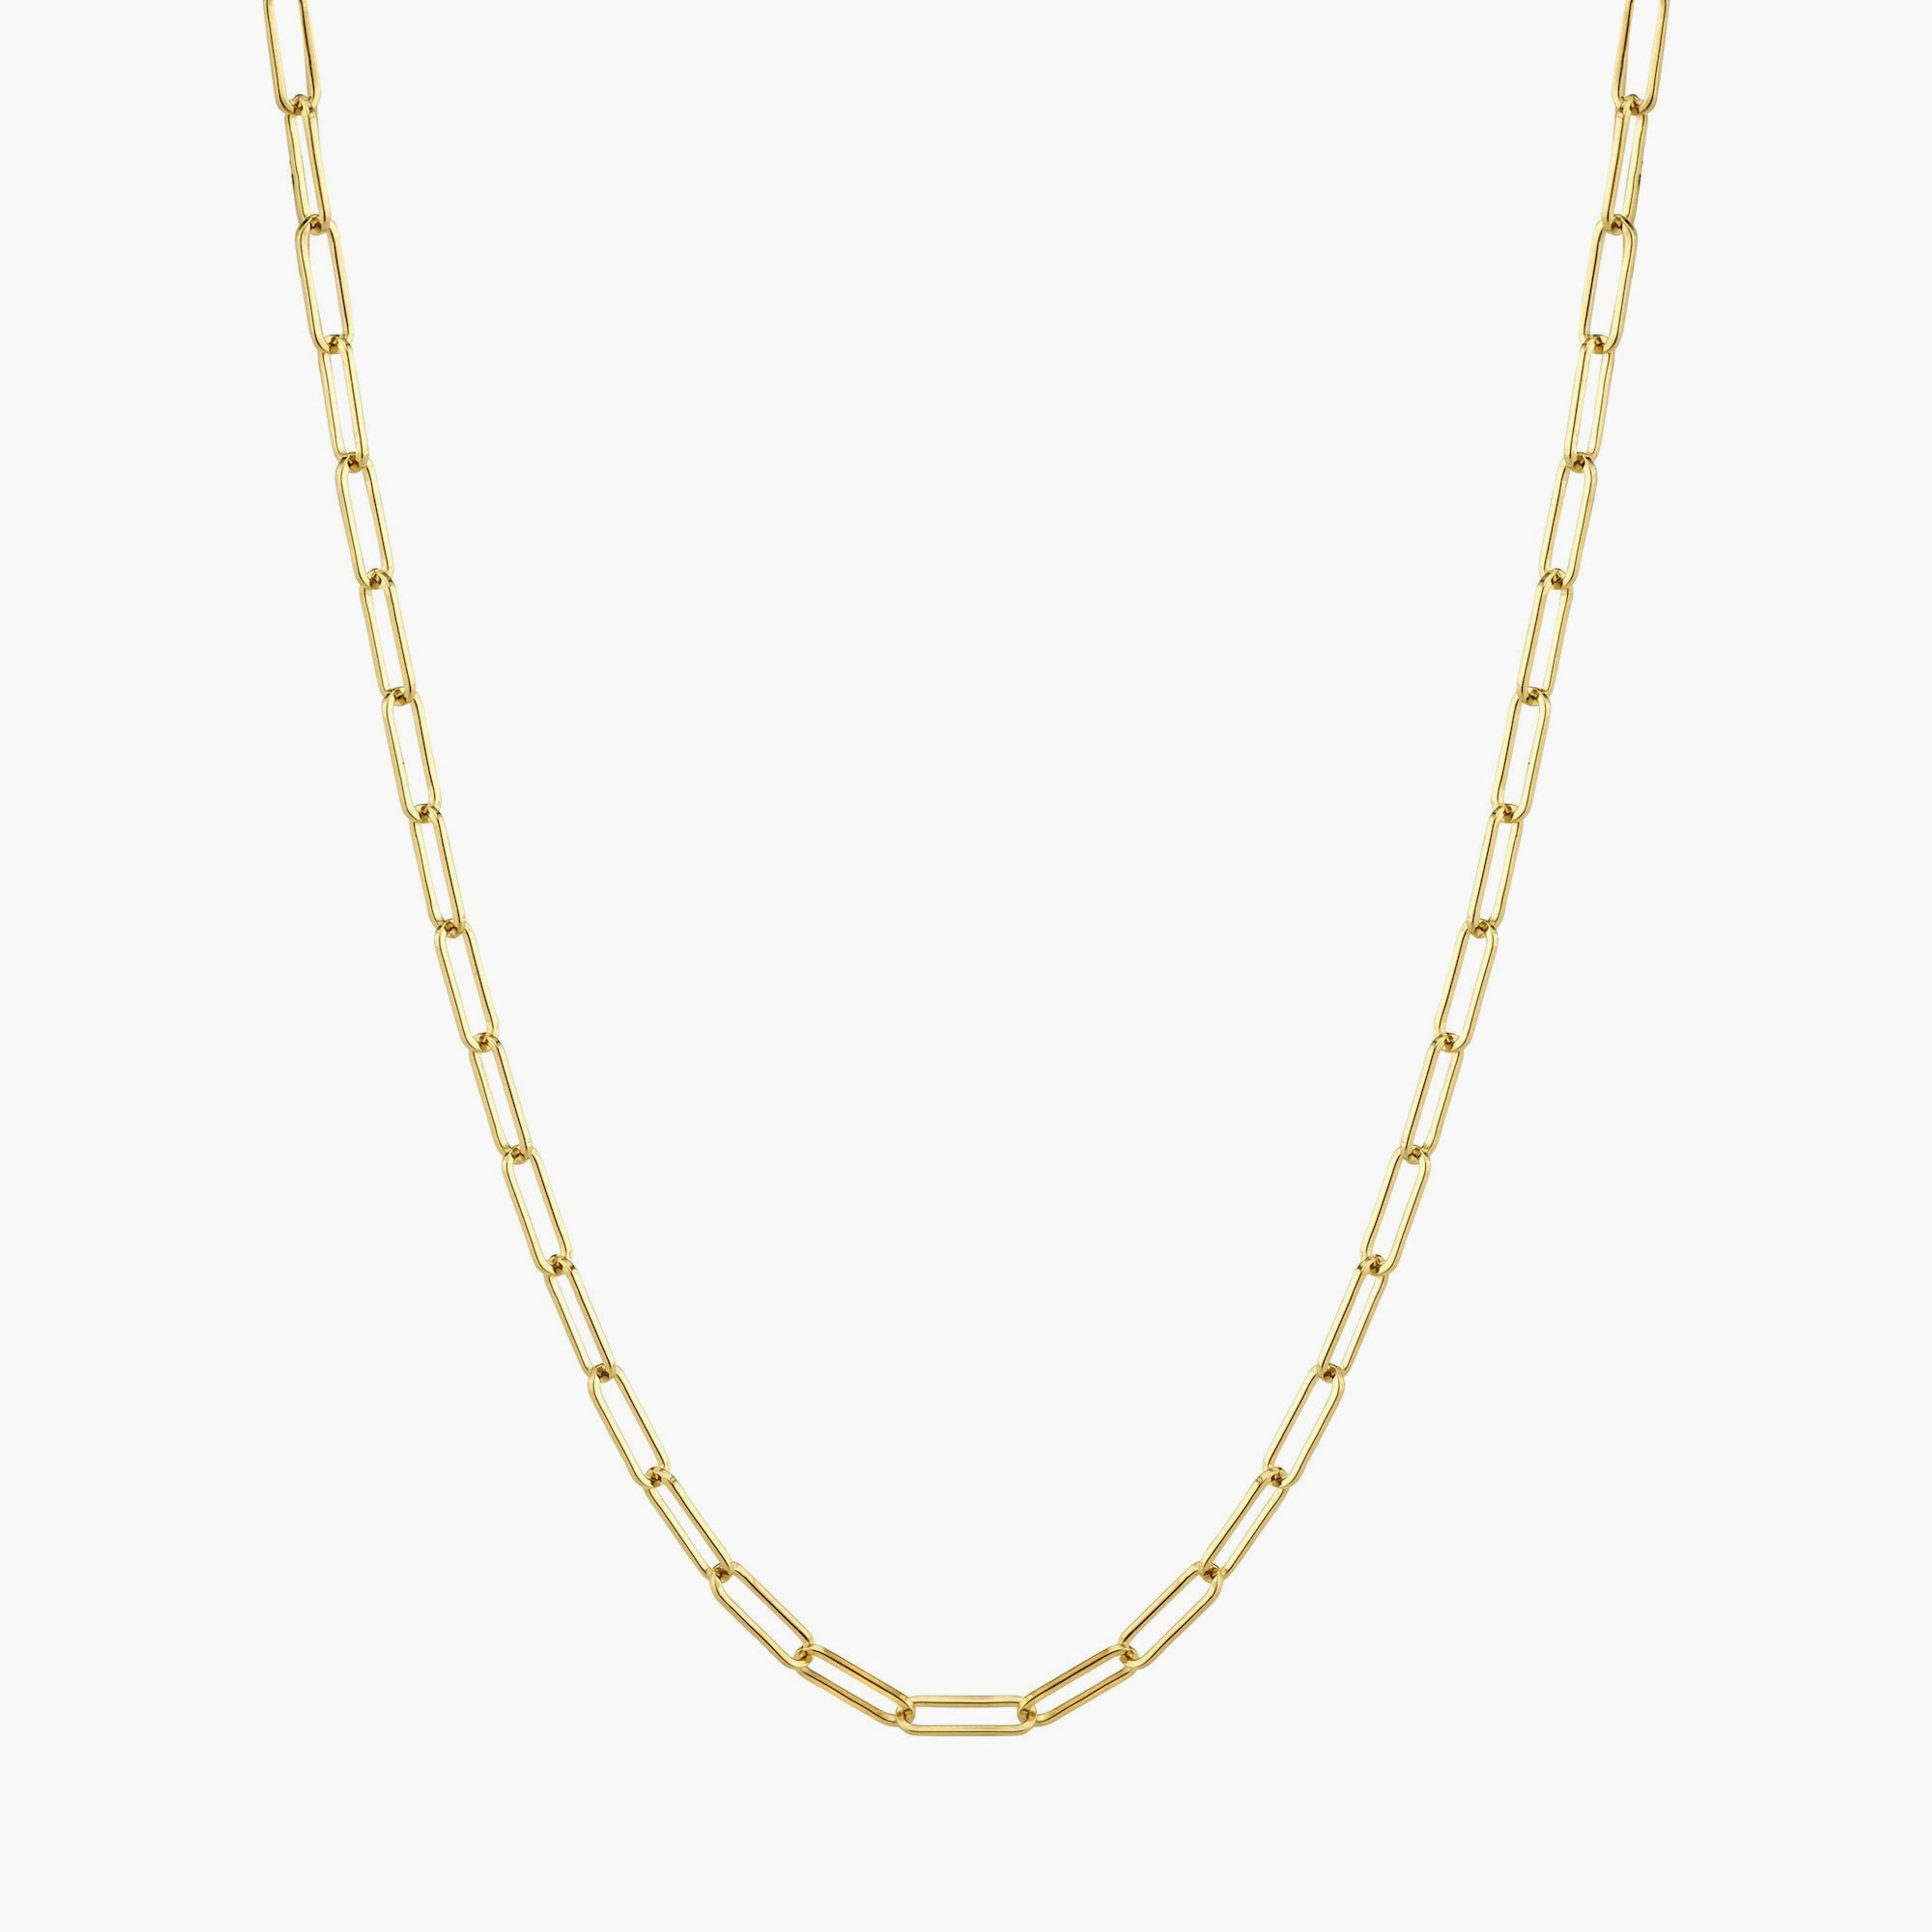 Staple Chain Necklace